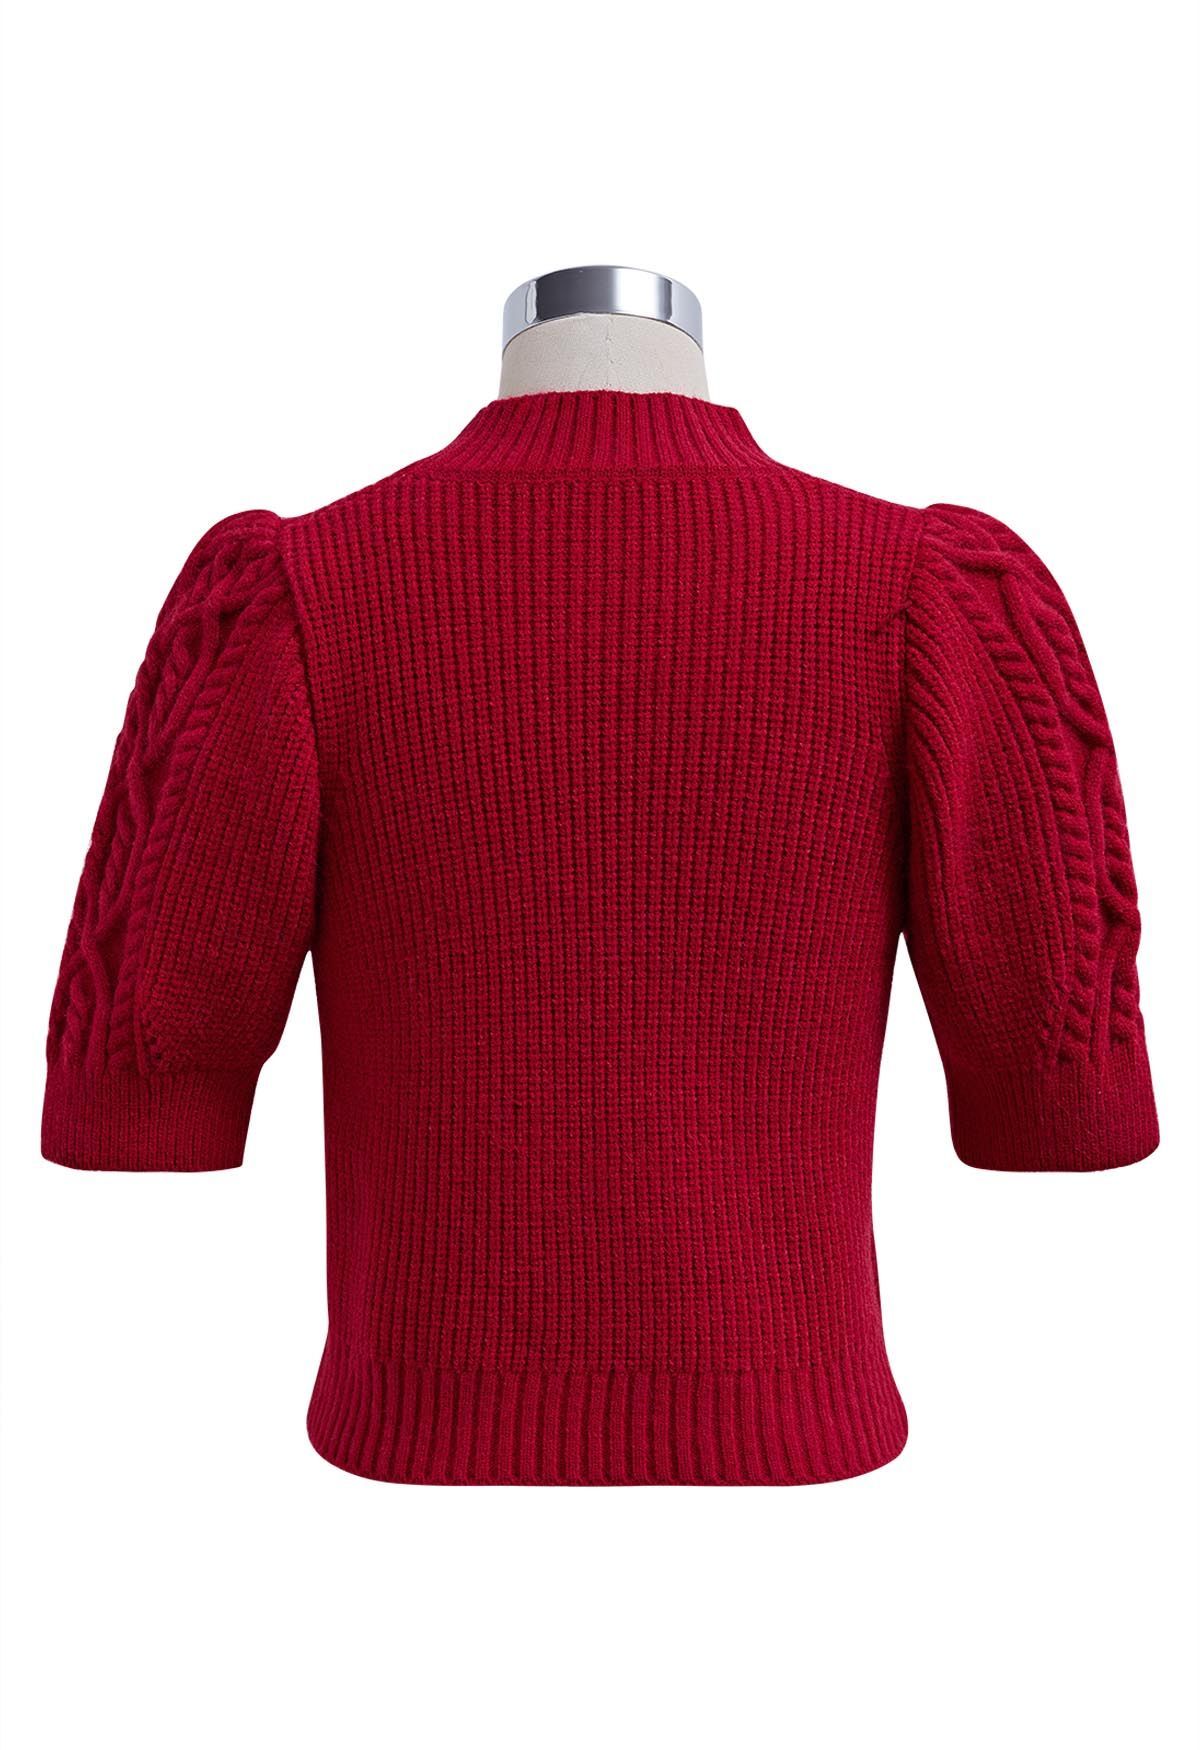 Mock Neck Short Sleeve Knit Sweater in Red | Chicwish